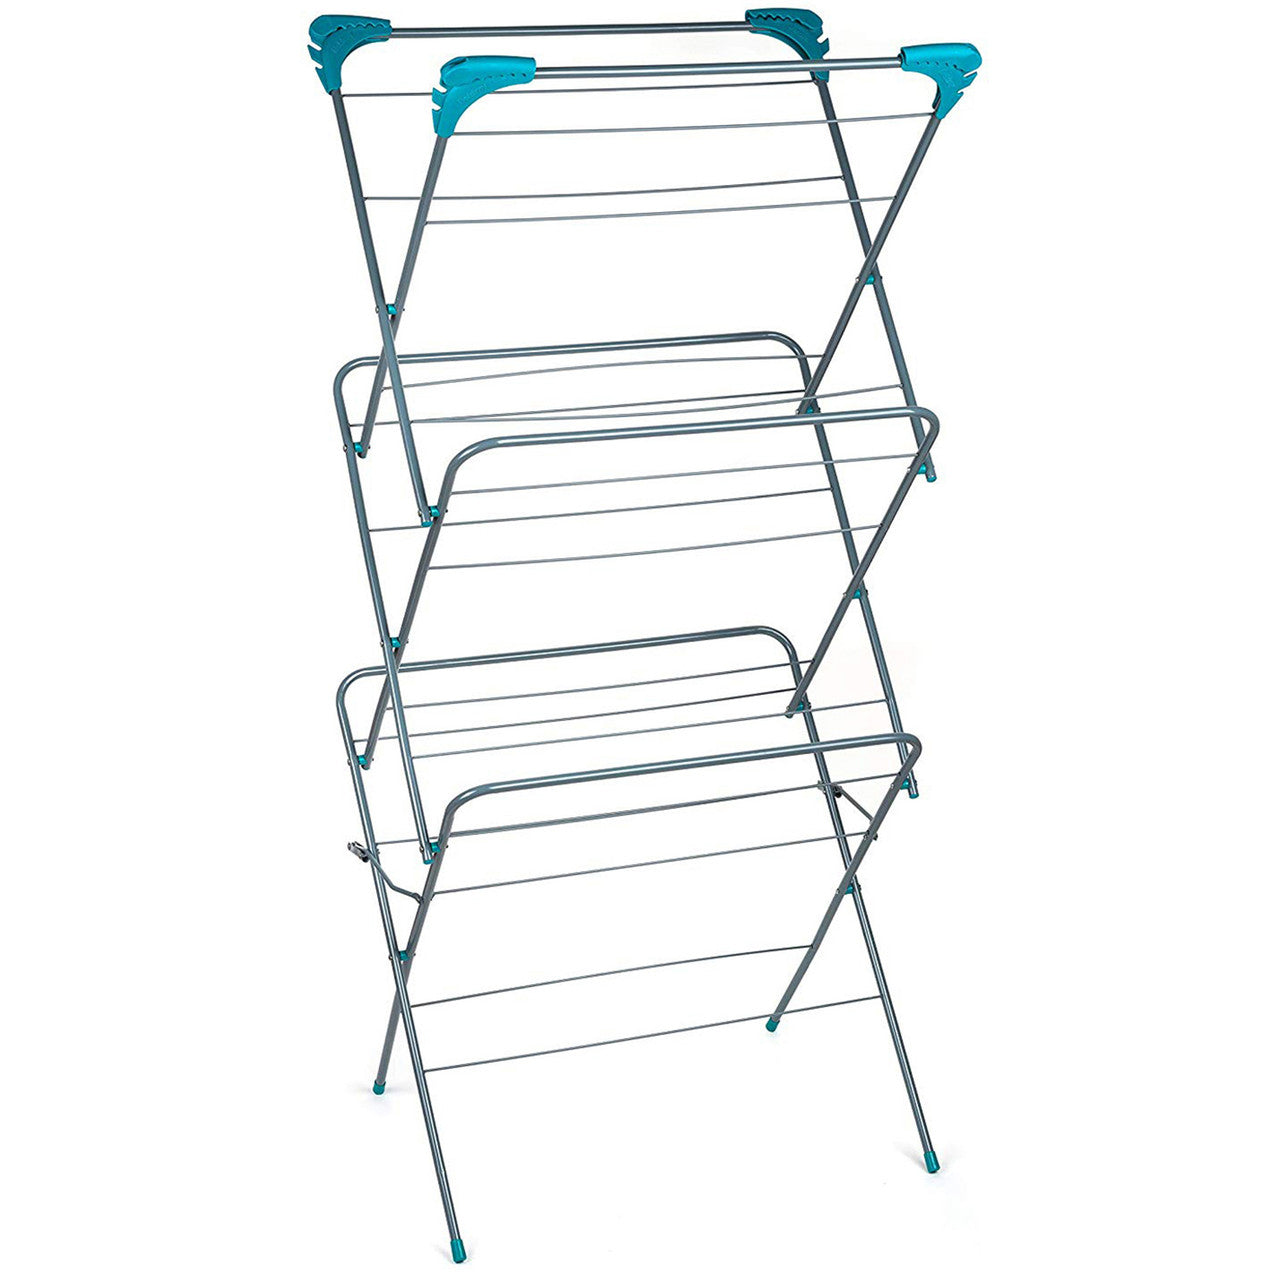 Beldray 3 Tier Elegant Clothes Horse Laundry Airer - Blue | LA050397XEU7 from Beldray - DID Electrical